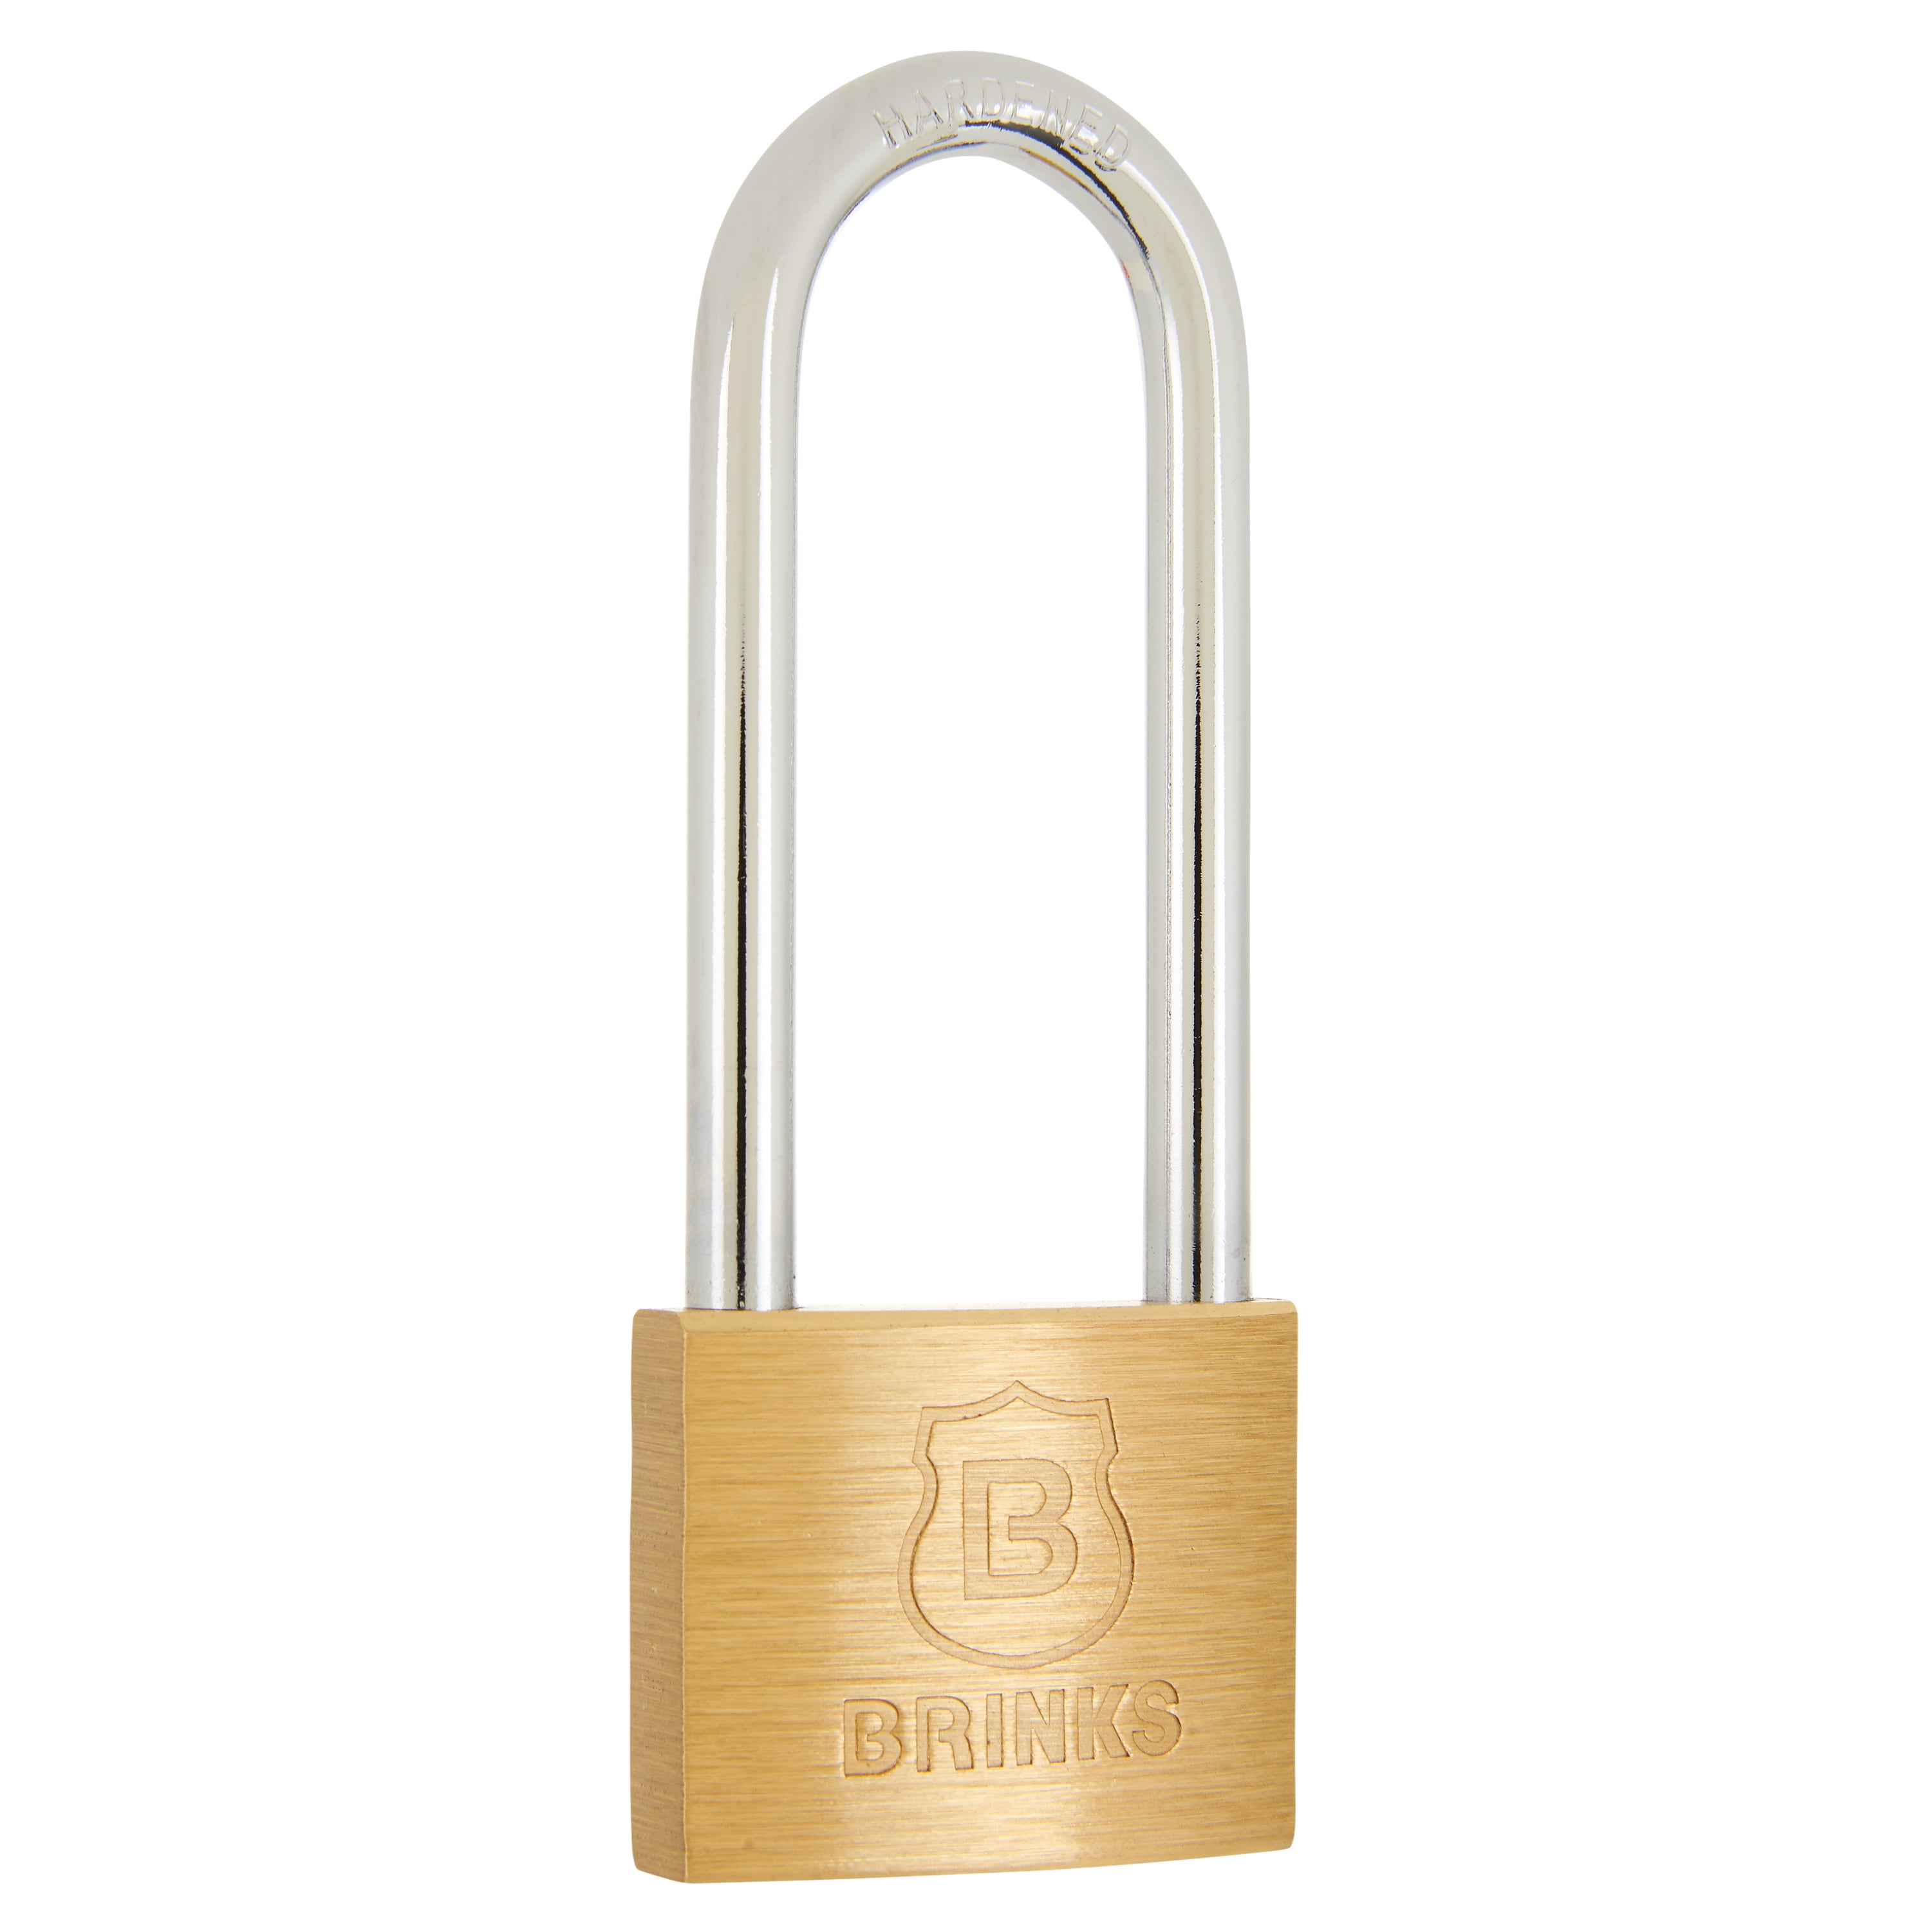 Brinks 40mm Solid Brass Padlock with 2-1/2 inch Long Shackle